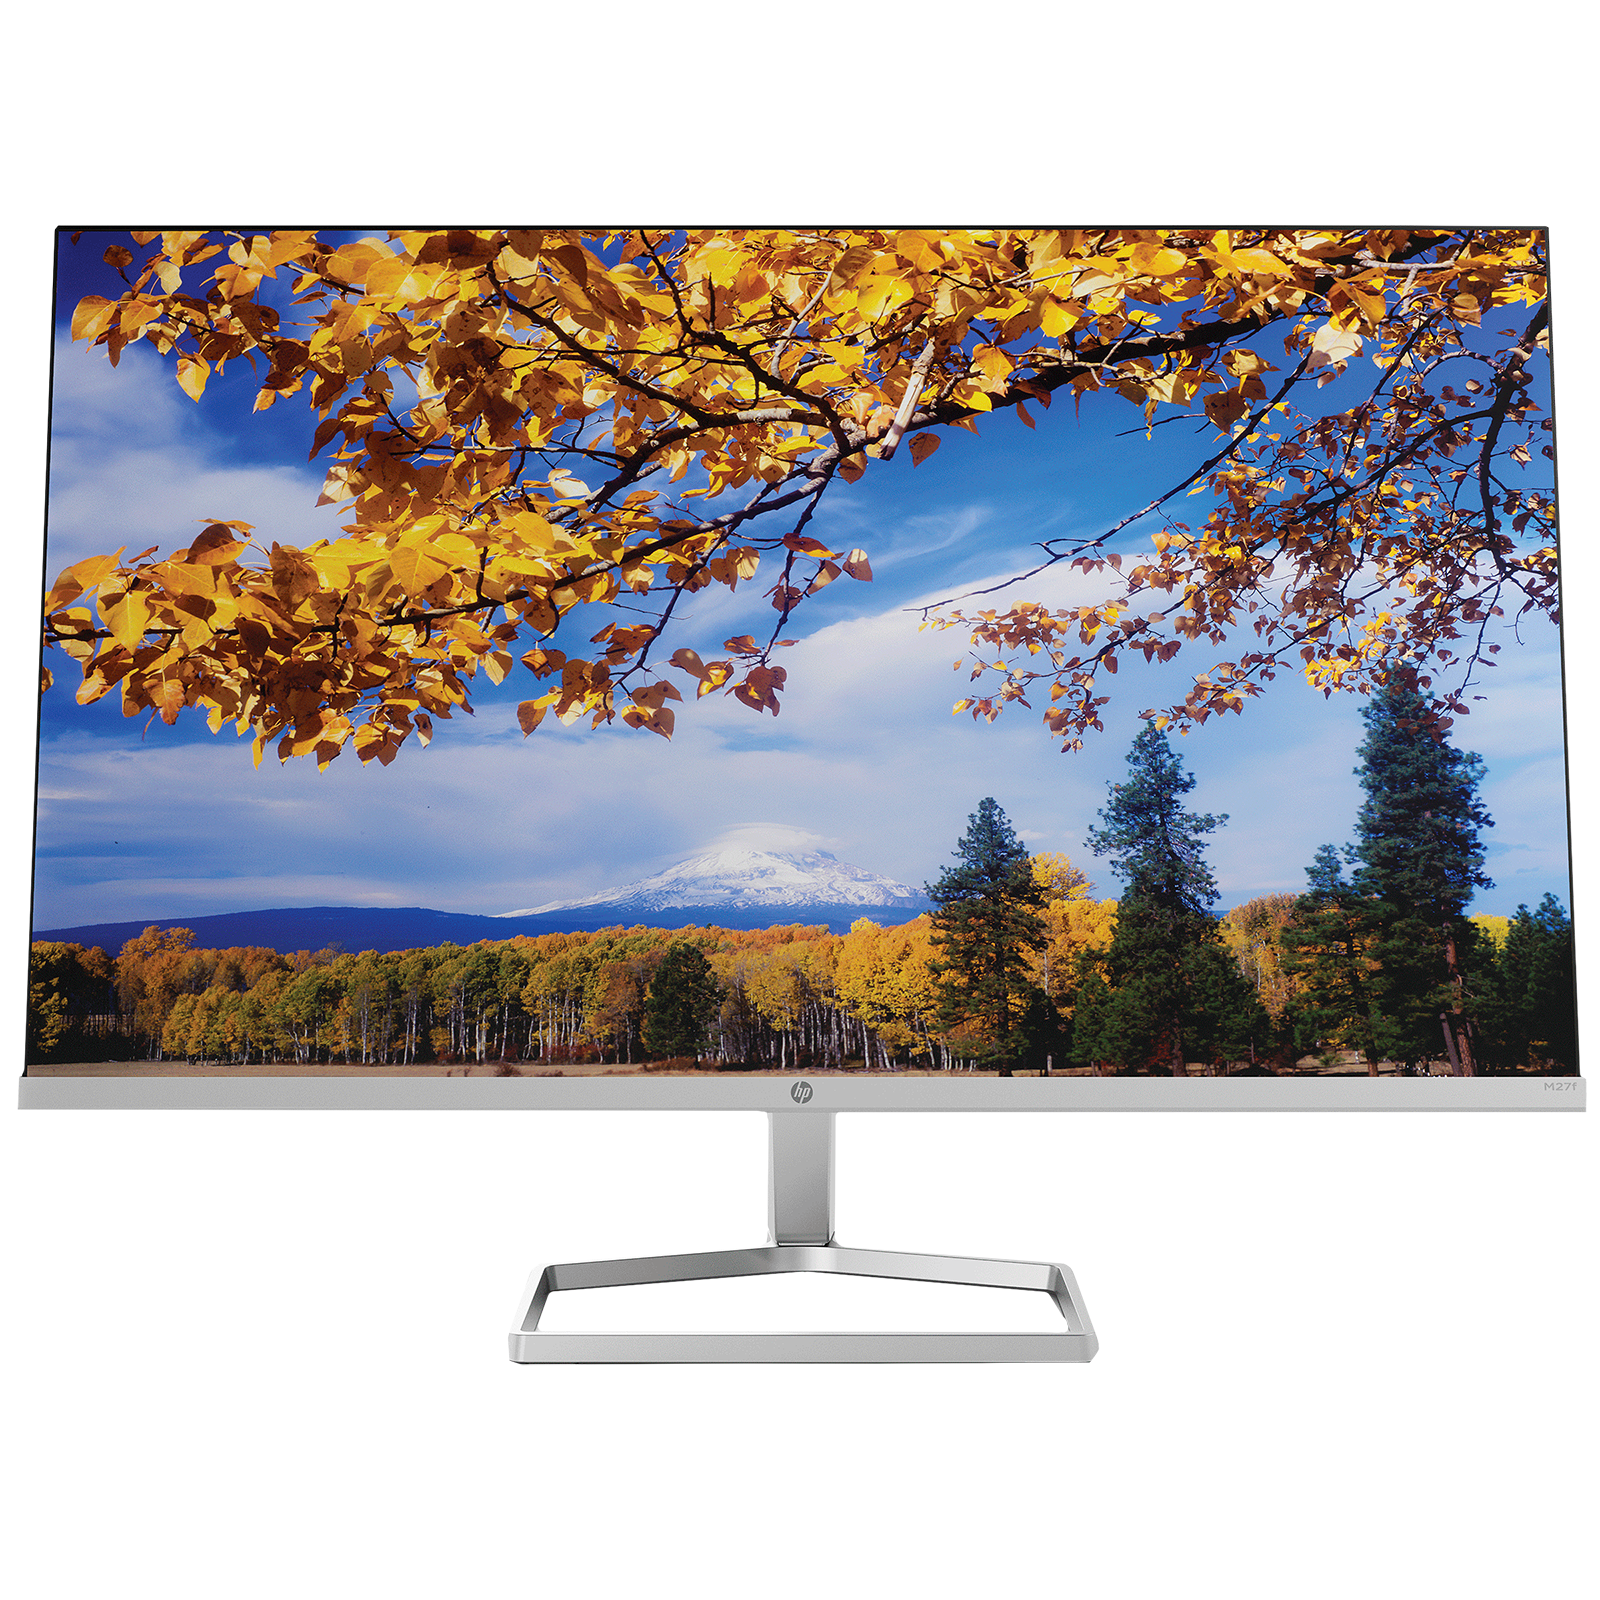 HP M27f 68.58cm (27 Inches) Full HD Flat Panel IPS Monitor ( with AMD FreeSync Technology)